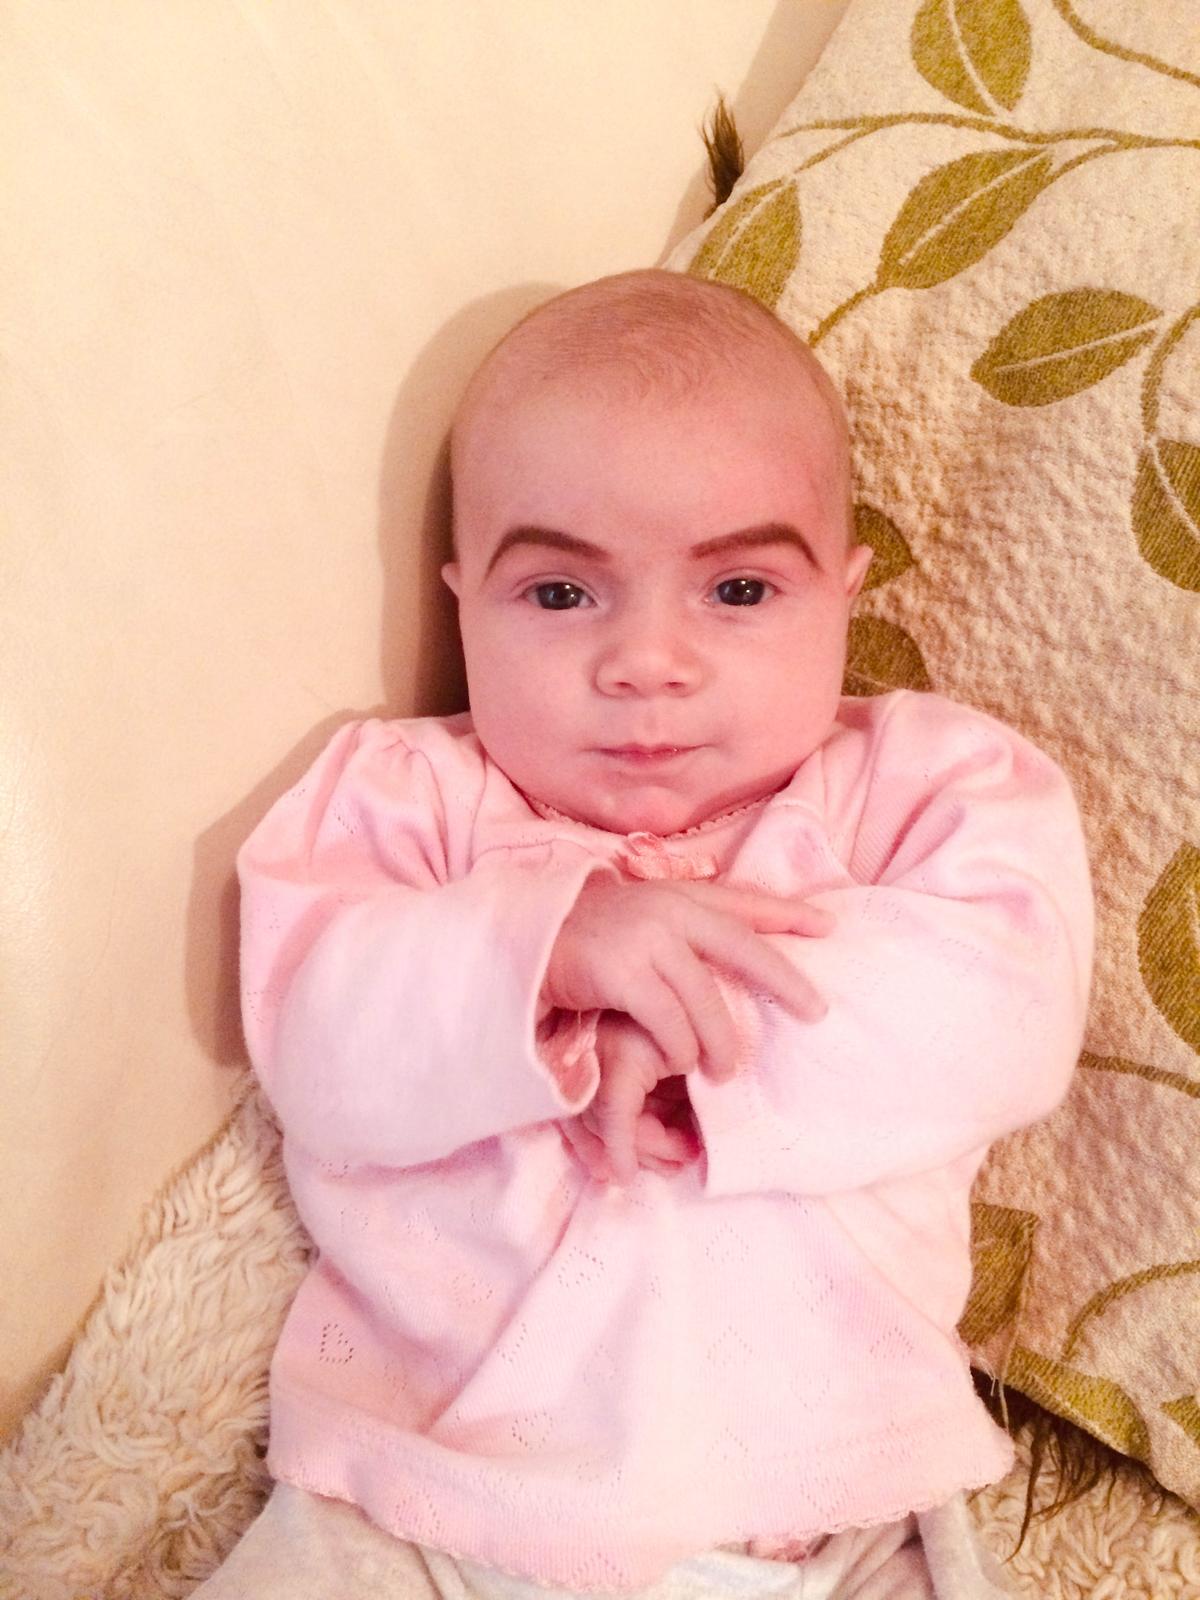 Danielle McSherry-Schee's daughter Isabella with eyebrows, courtesy of Mom (Caters News)